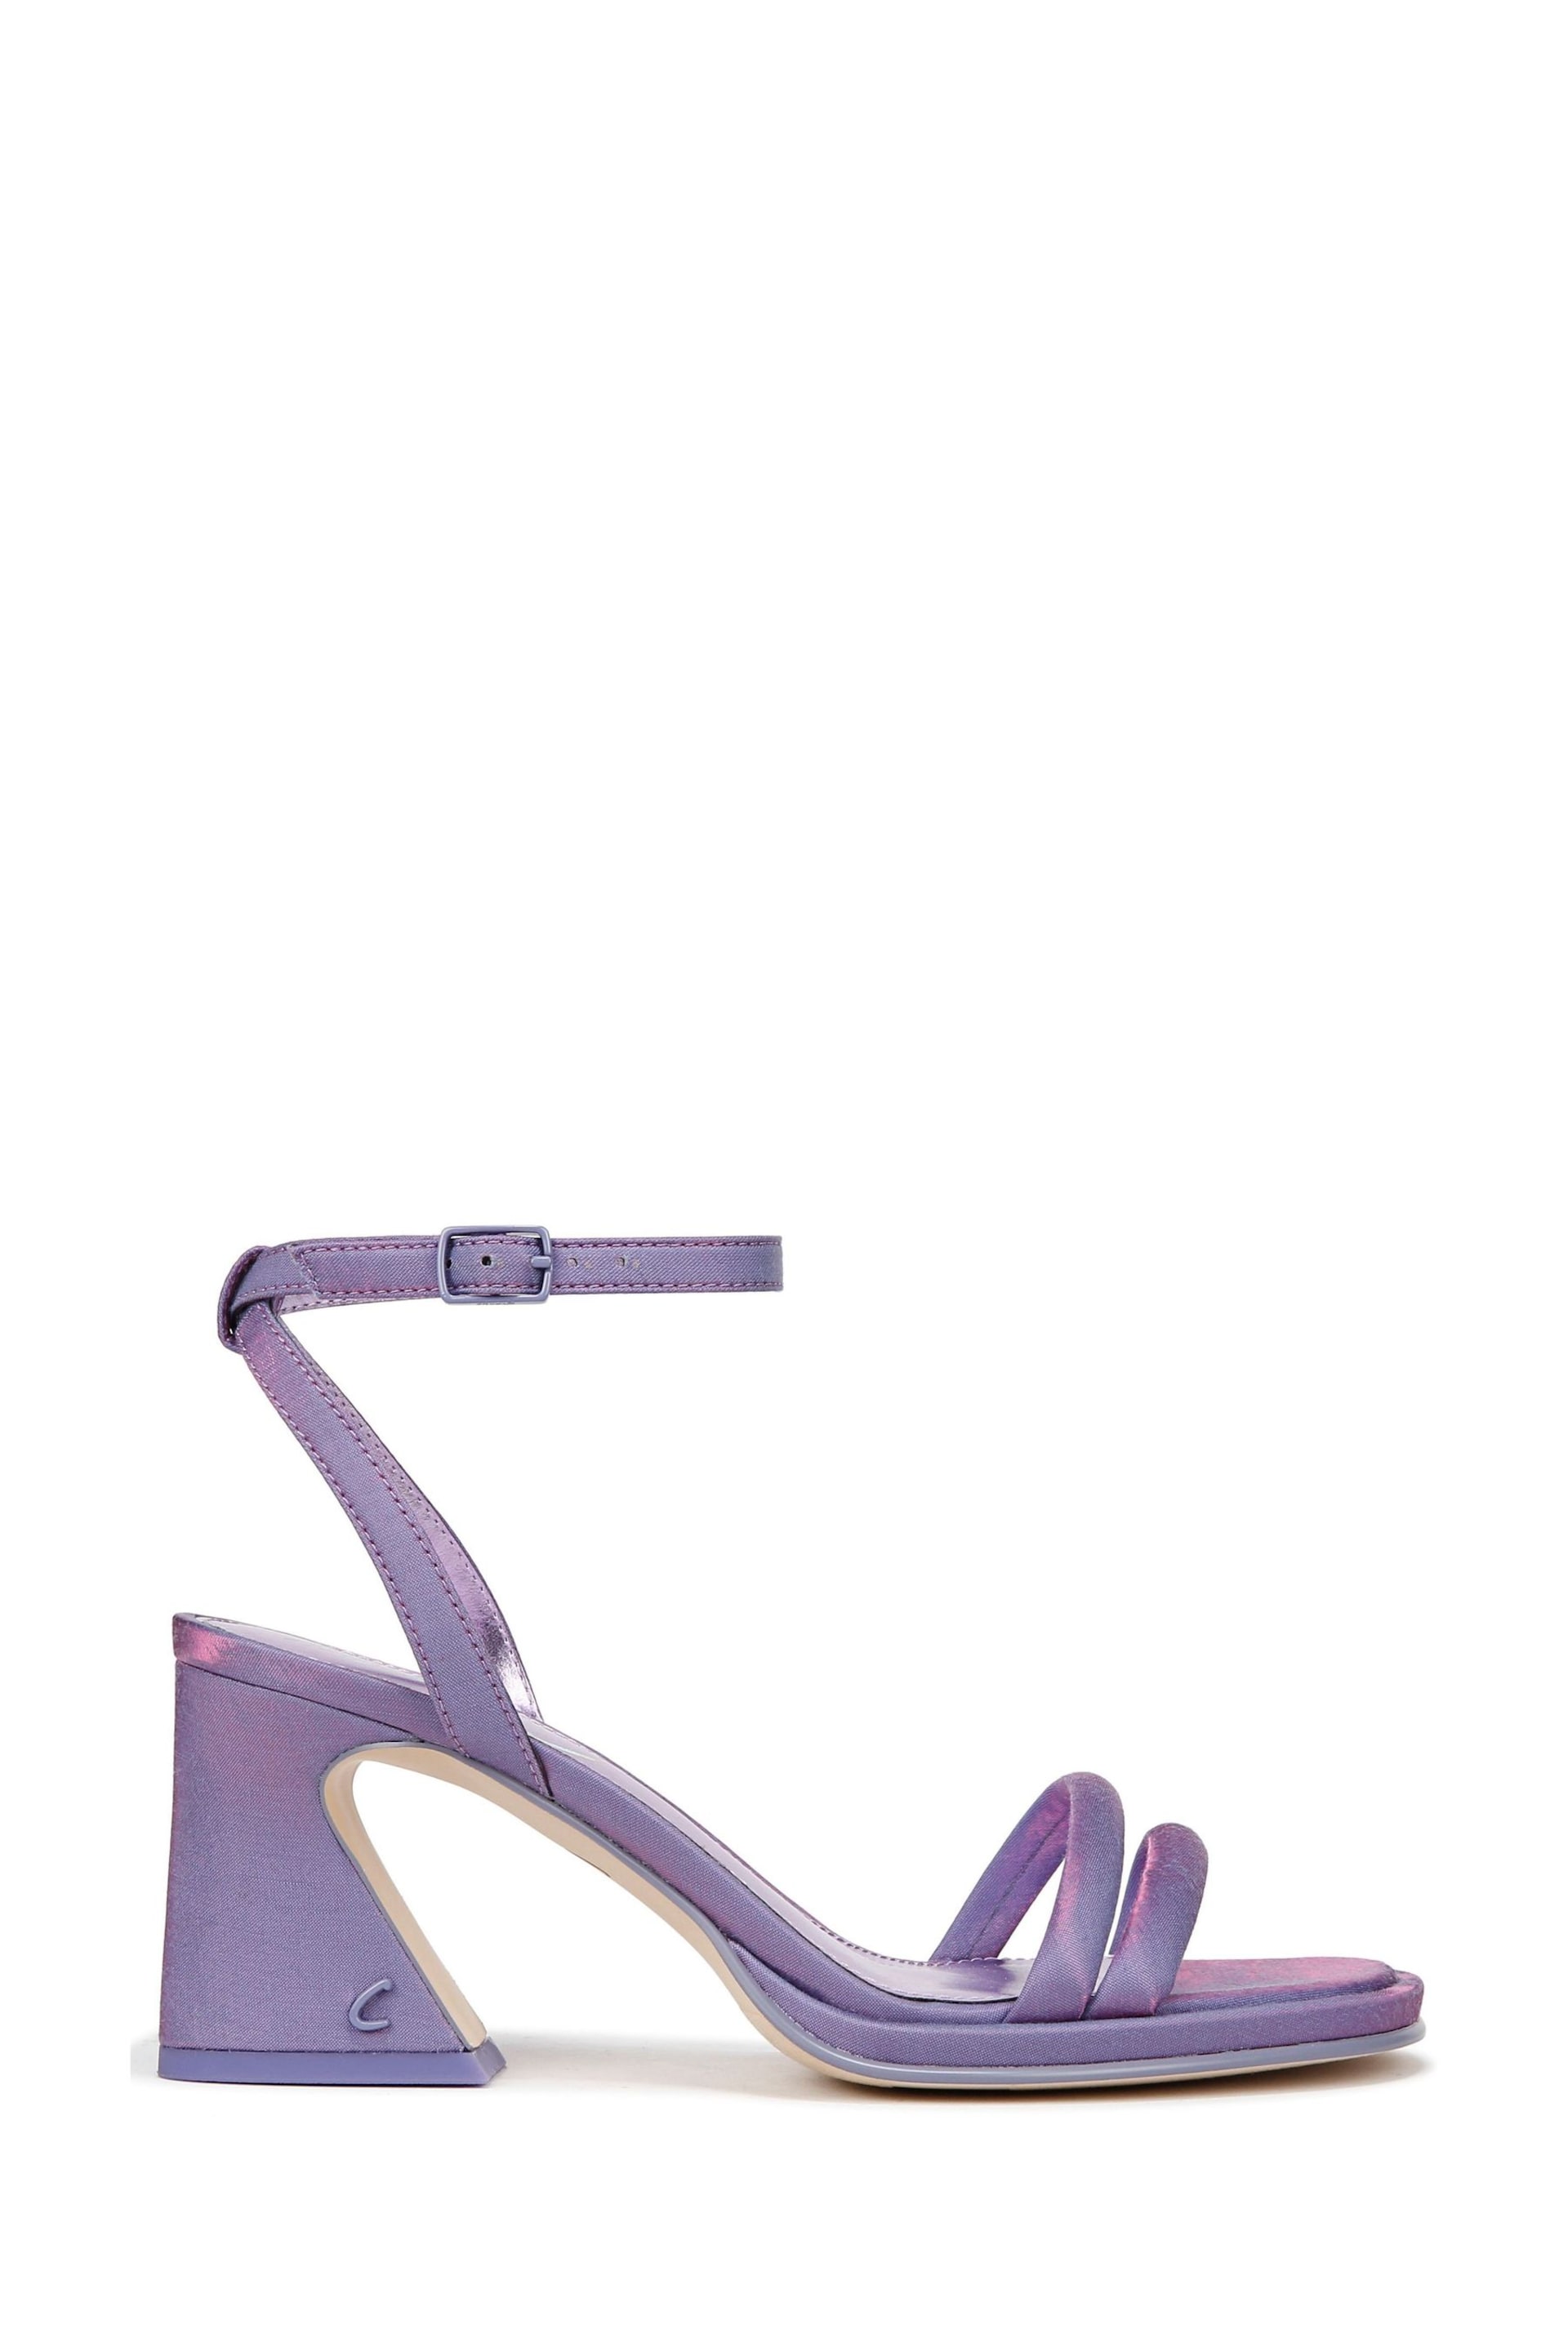 Circus NY Hartlie Strappy Sandals - Image 1 of 7